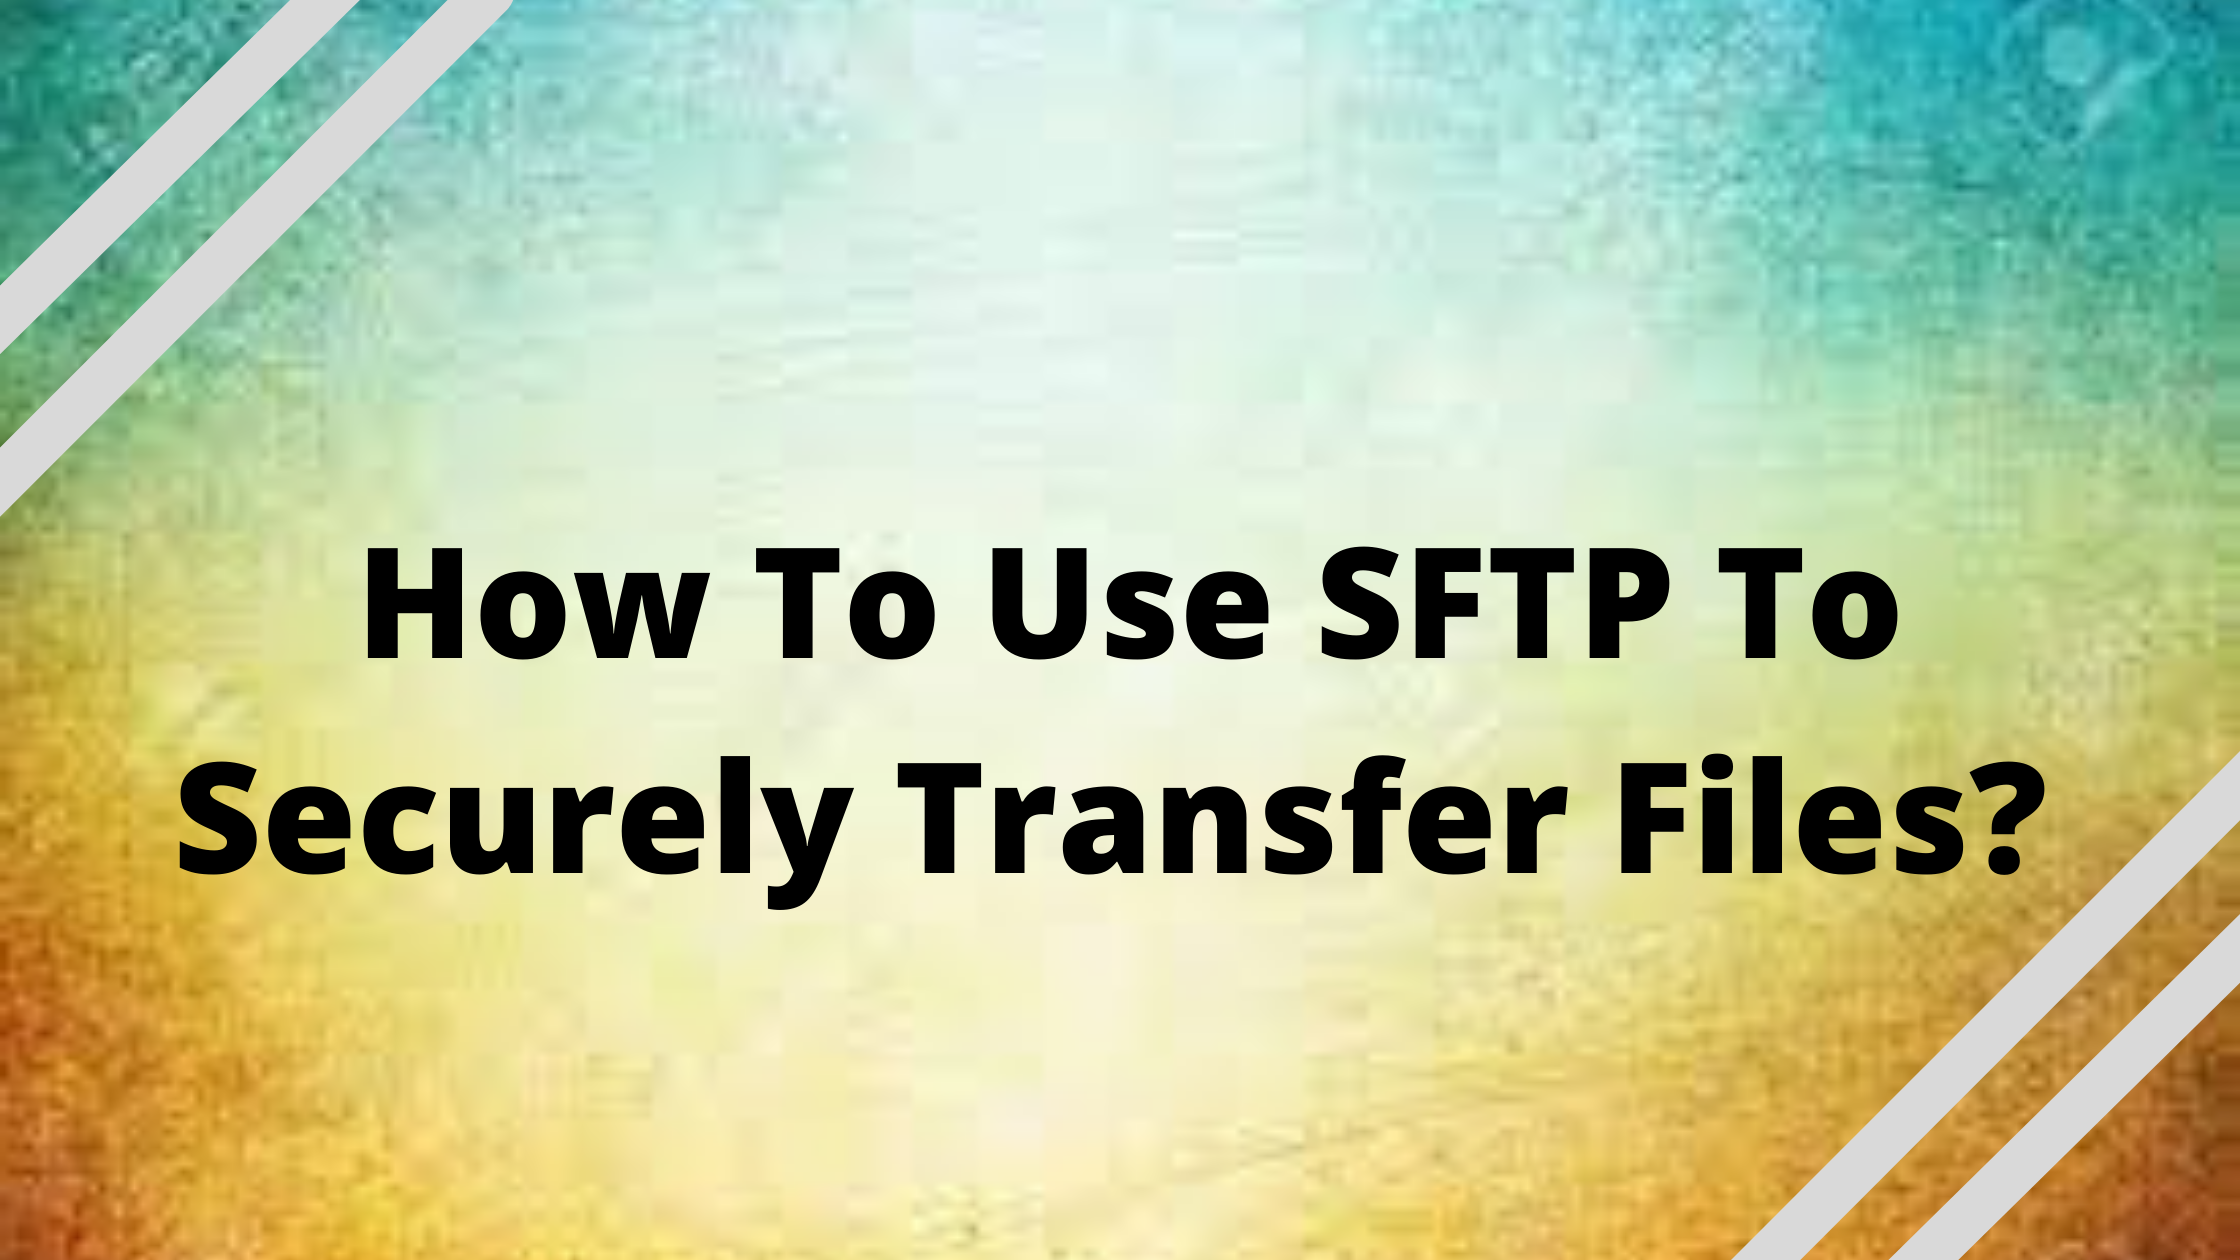 Use SFTP To Securely Transfer Files